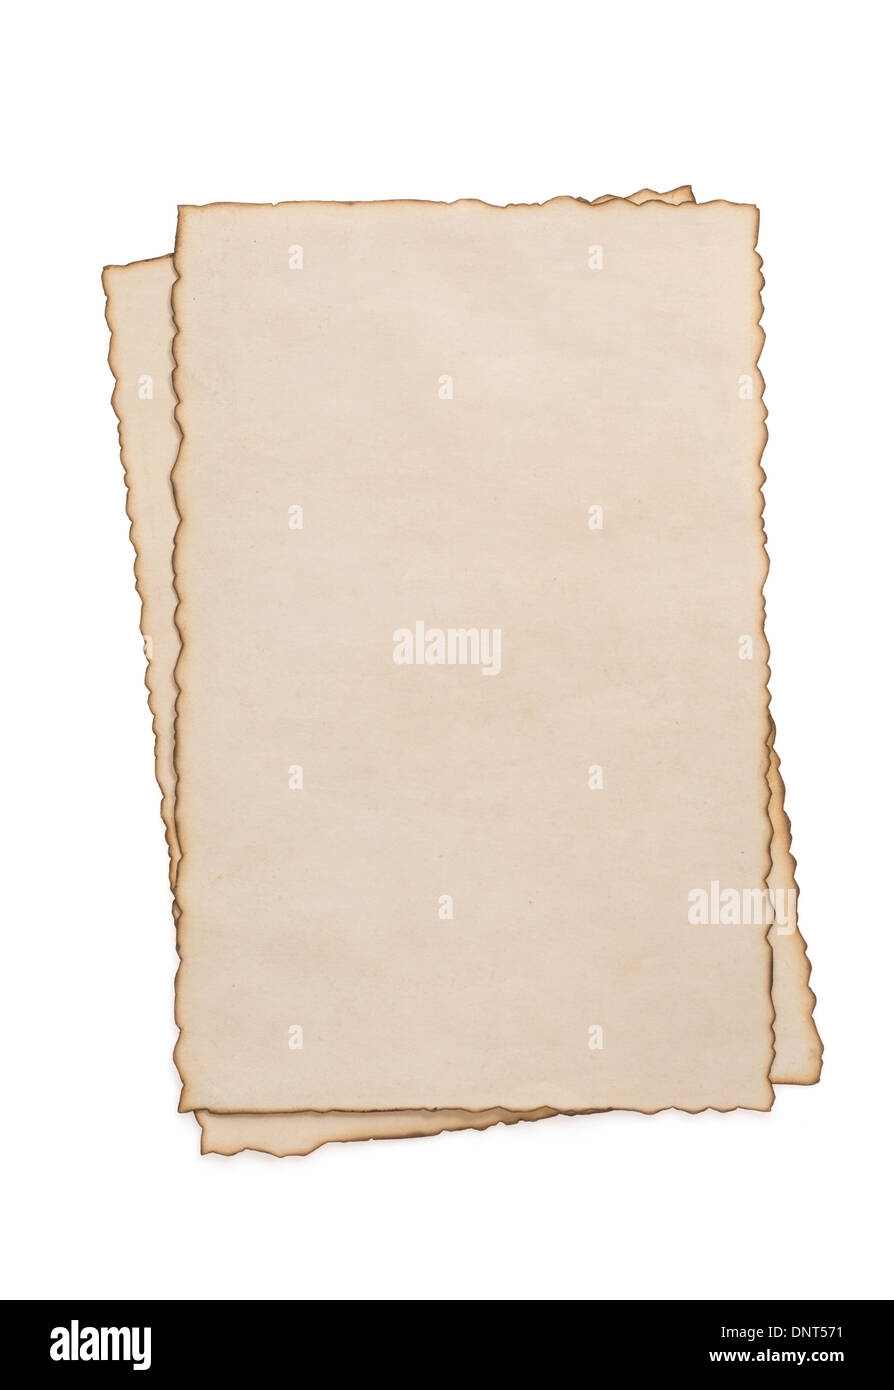 paper vintage parchment isolated on white background Stock Photo